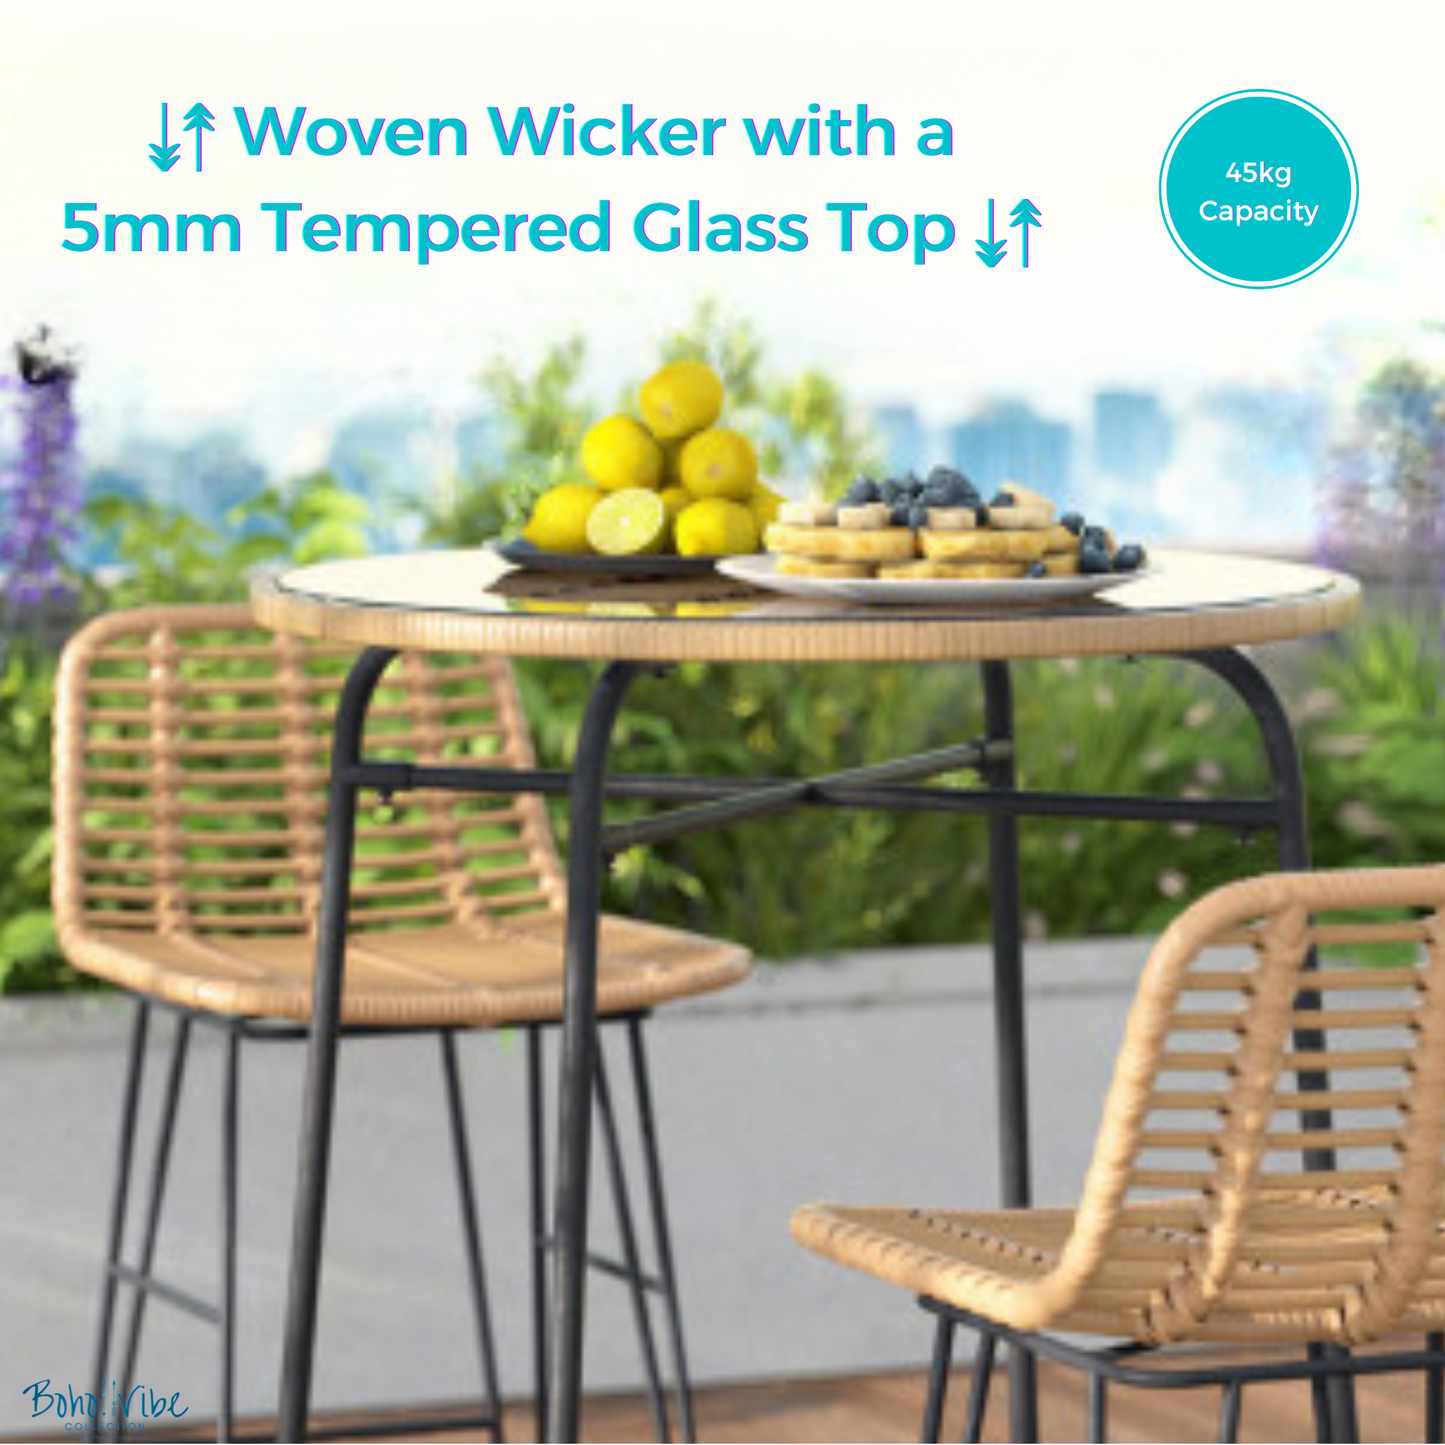 Boho ↡↟ Vibe Collection ↠ Wicker Bar Table Stylish Glass Outdoor Patio Dining 